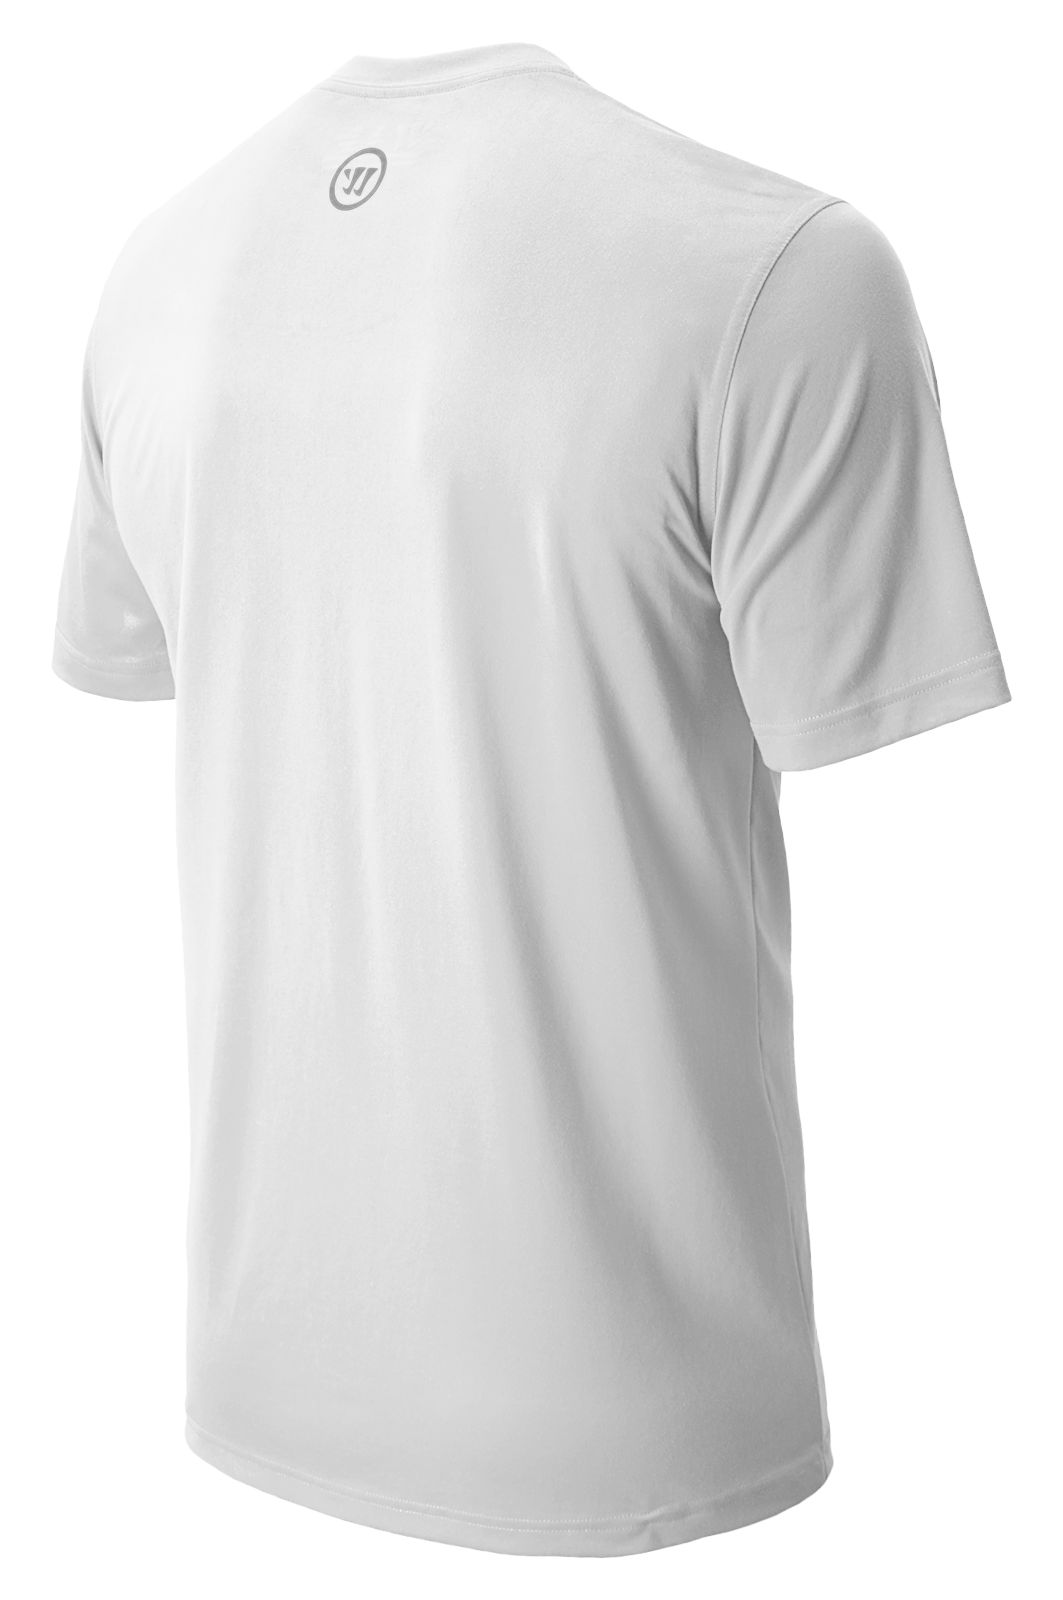 Wartech Tee SS, White image number 0